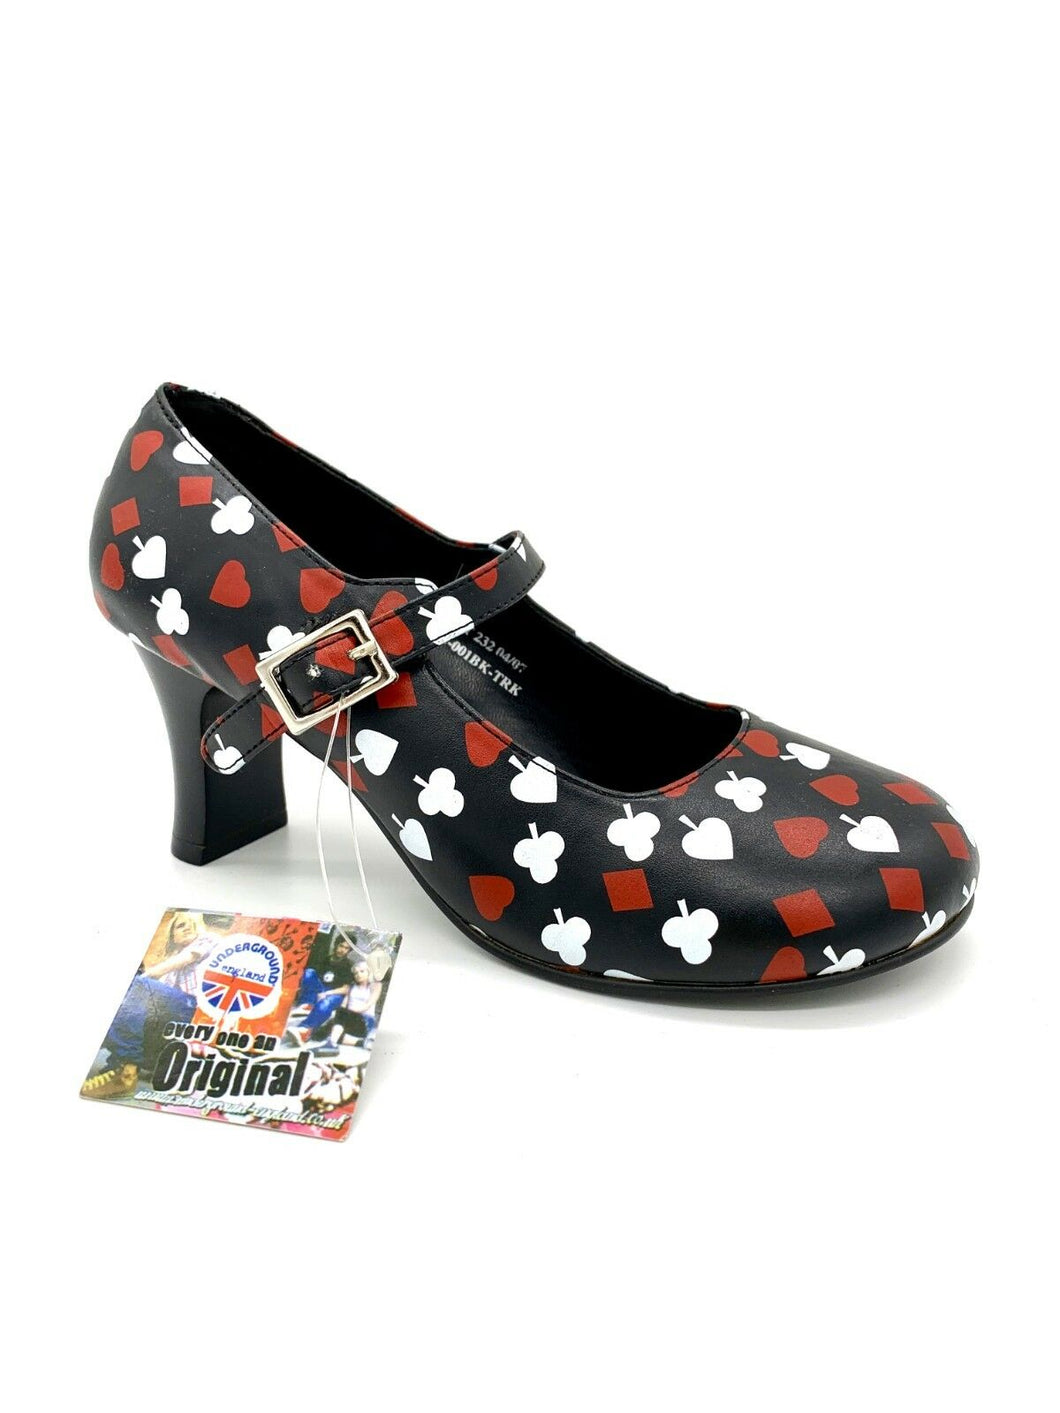 Underground England Women's Shoes Shoes Pumps - Rockabilly Style Ace of Spades Hearts Check